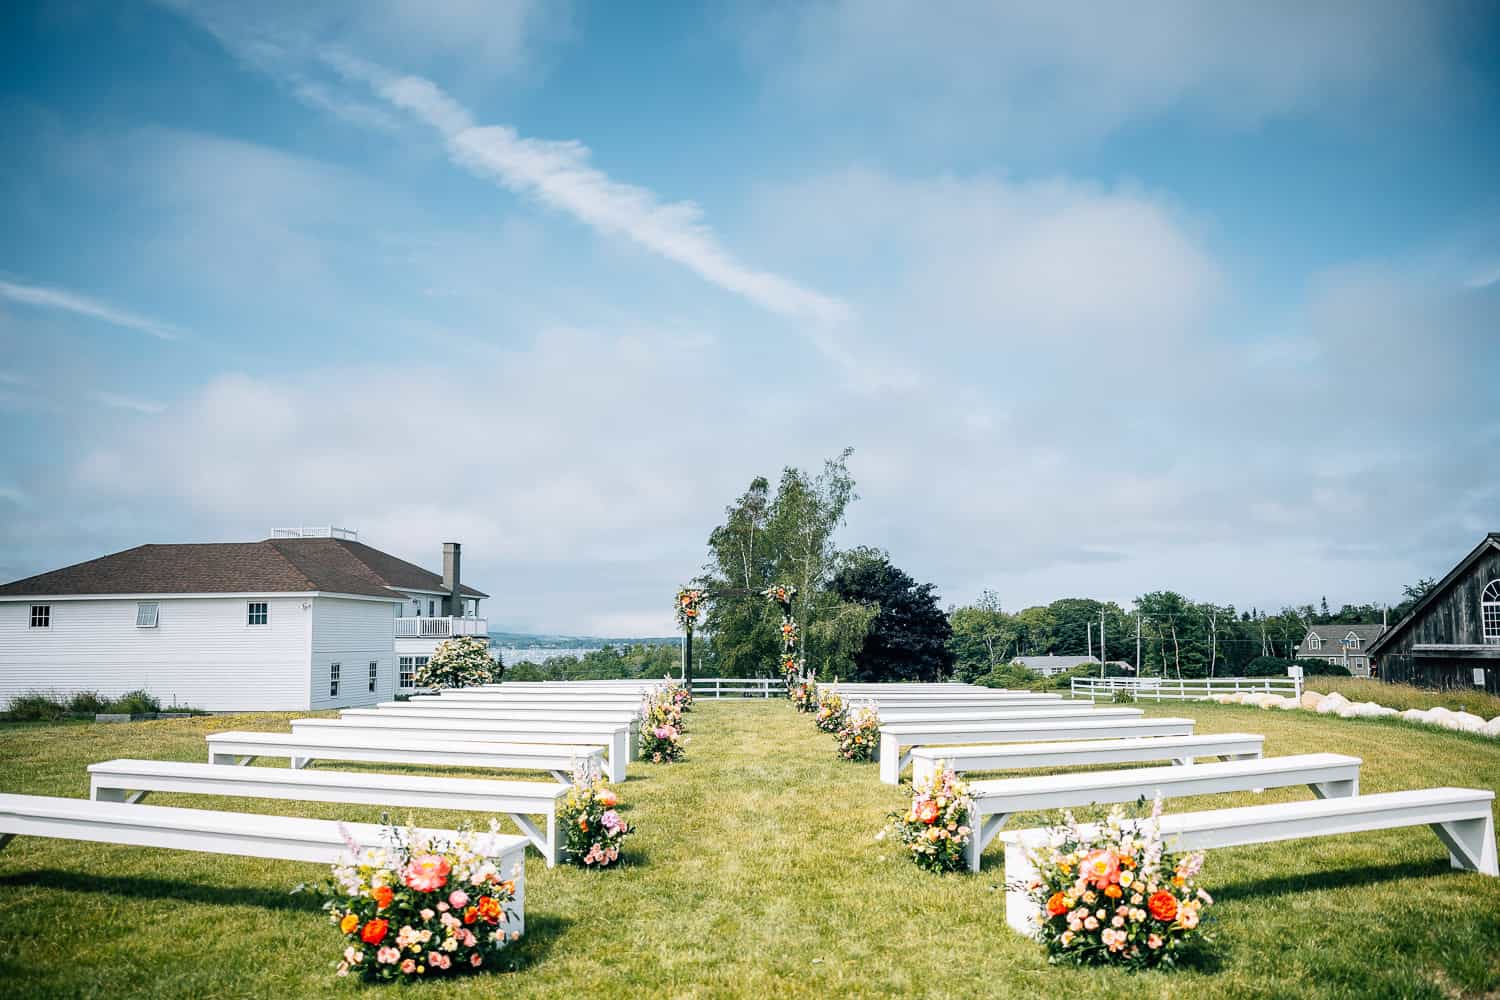 Outdoor wedding venue at Ash Point Estate, with white benches and floral decorations on a grassy field, under a blue sky with scattered clouds.